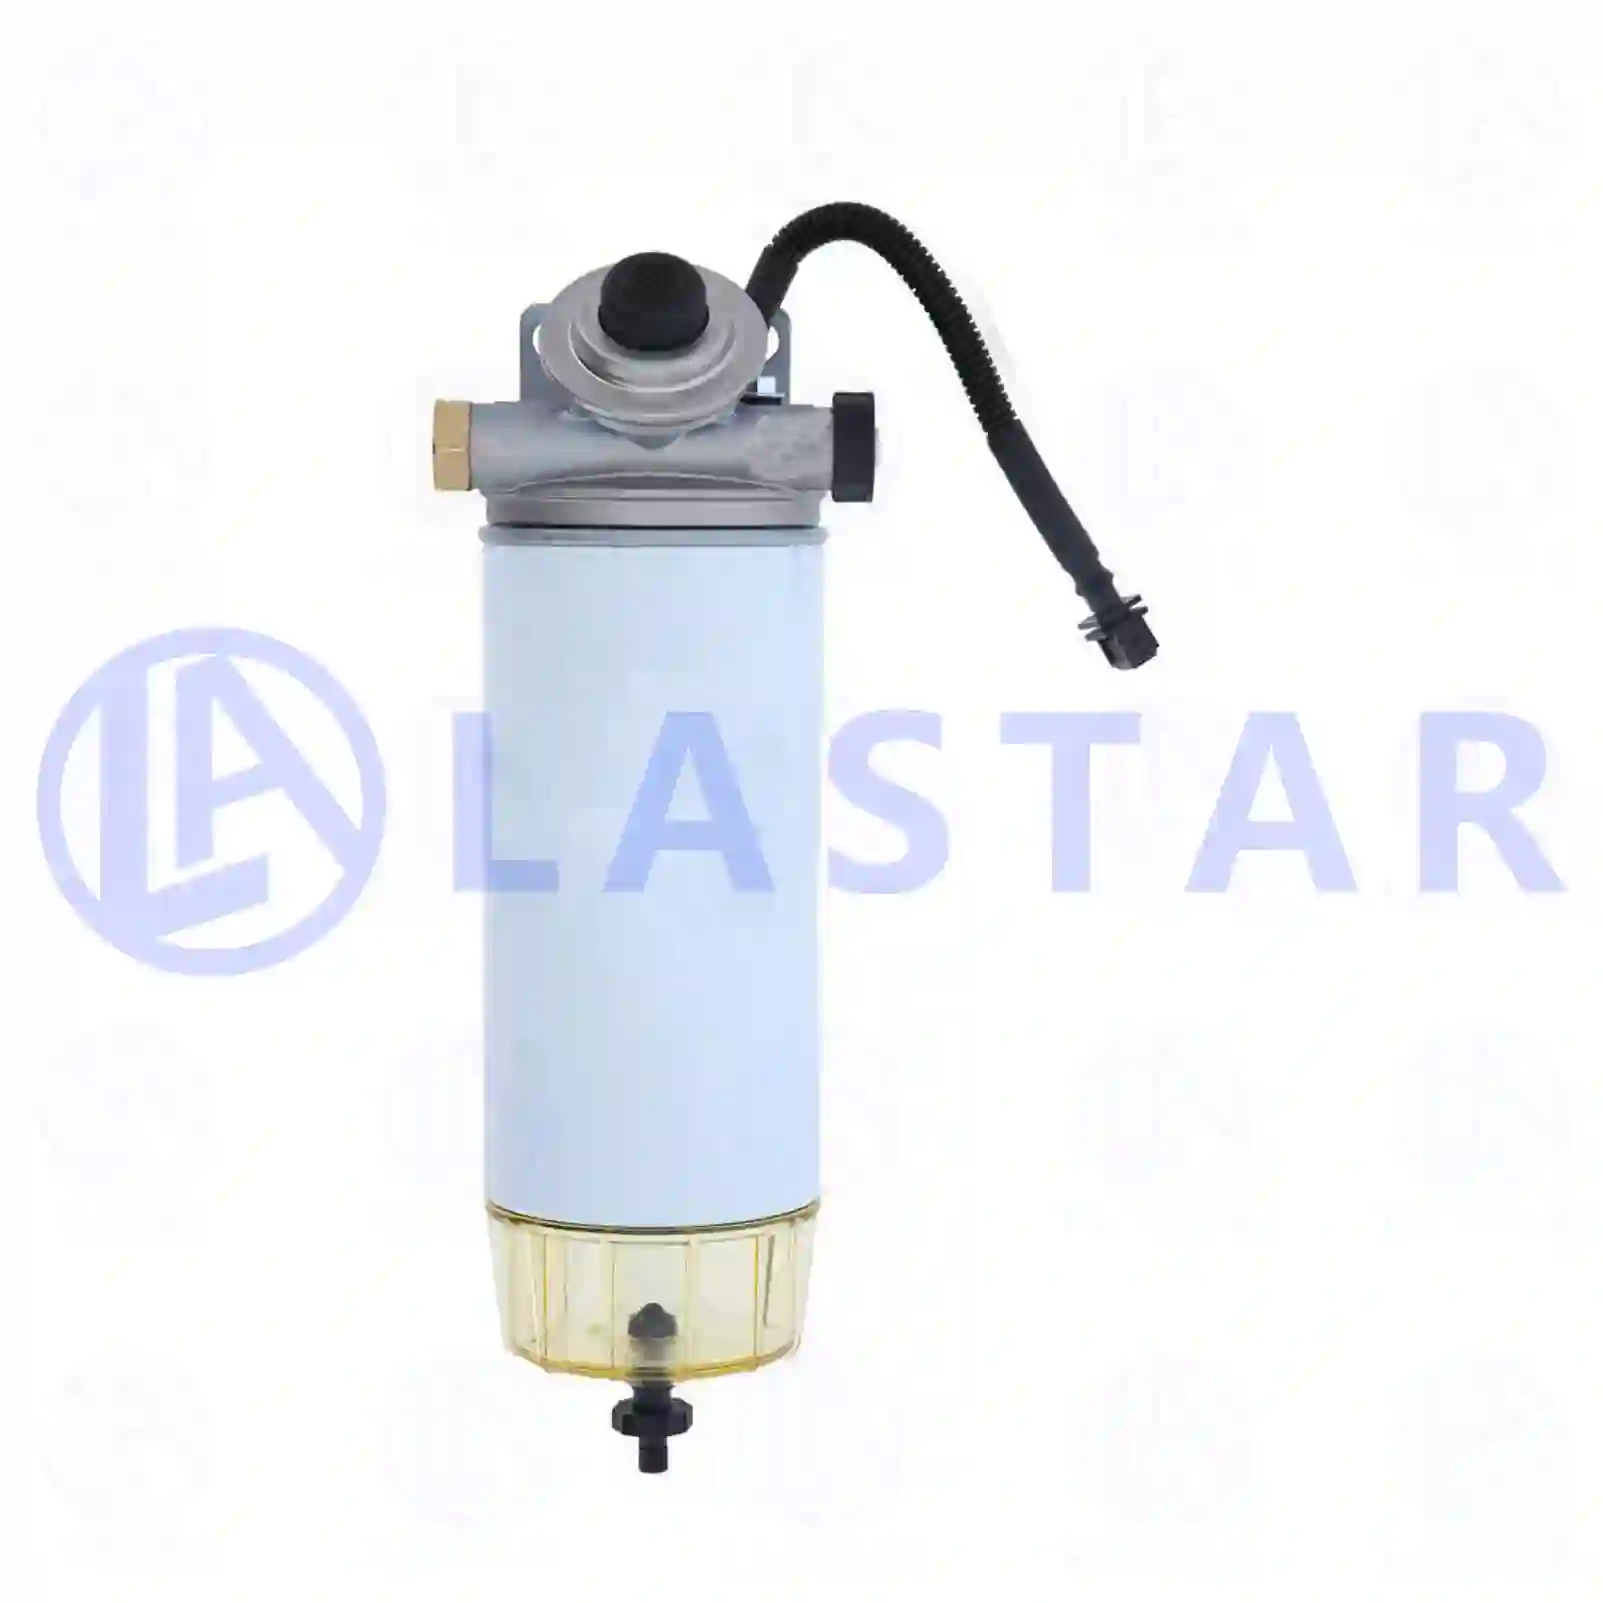 Water separator, complete, heated, 77723894, 4702190 ||  77723894 Lastar Spare Part | Truck Spare Parts, Auotomotive Spare Parts Water separator, complete, heated, 77723894, 4702190 ||  77723894 Lastar Spare Part | Truck Spare Parts, Auotomotive Spare Parts